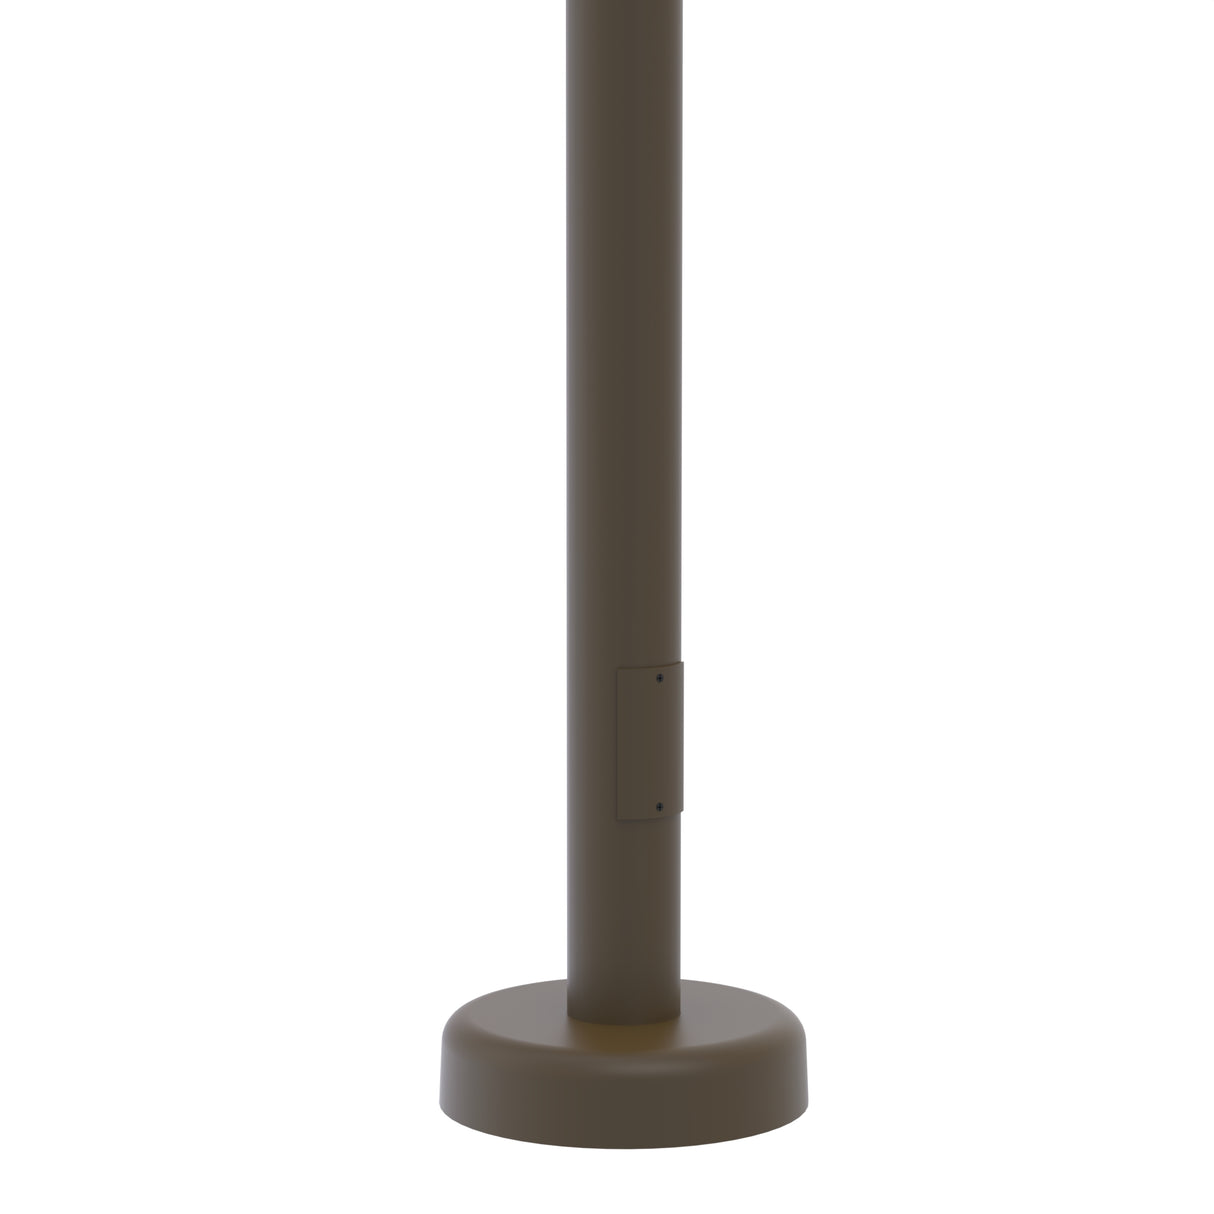 12' Tall x 5.0" OD x 0.188" Thick, Round Straight Aluminum, Hinged Anchor Base Light Pole